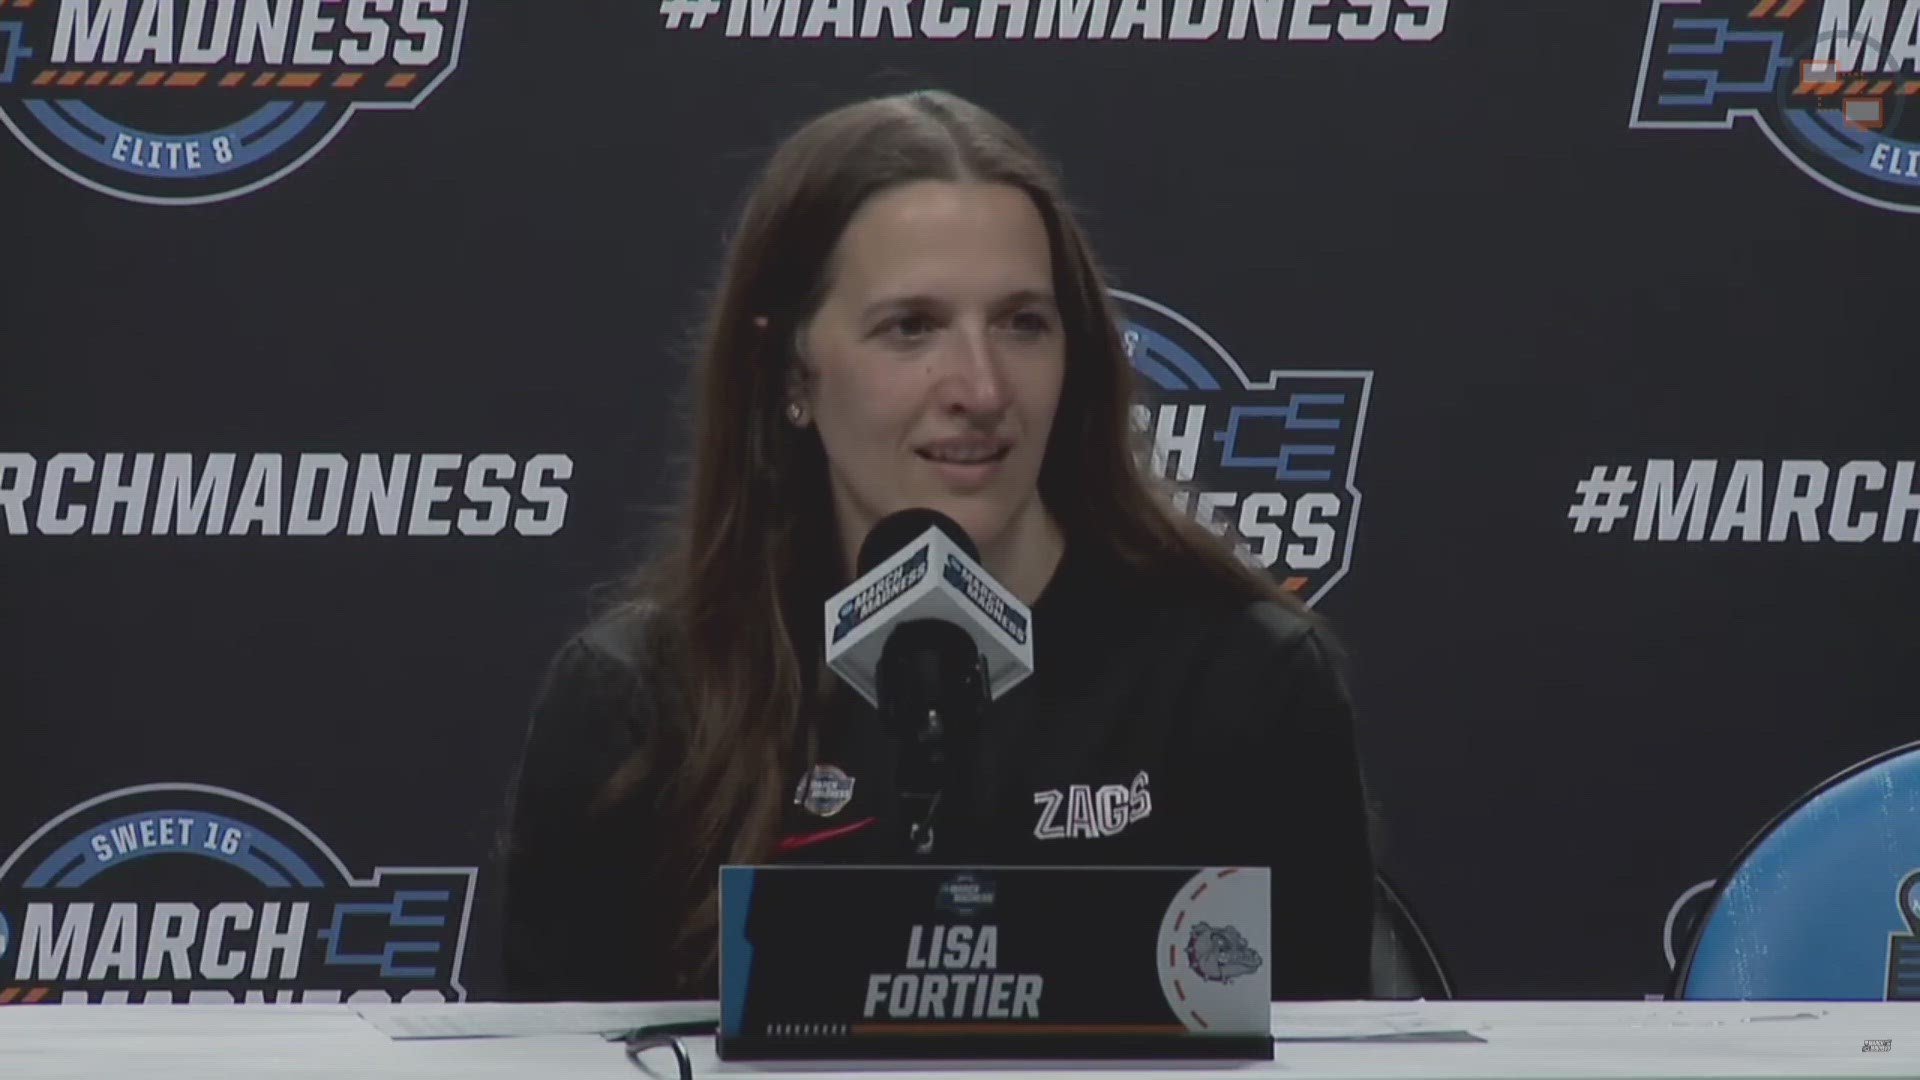 Gonzaga women discuss the loss to Texas in the Sweet 16 of the NCAA Tournament 69 -47.